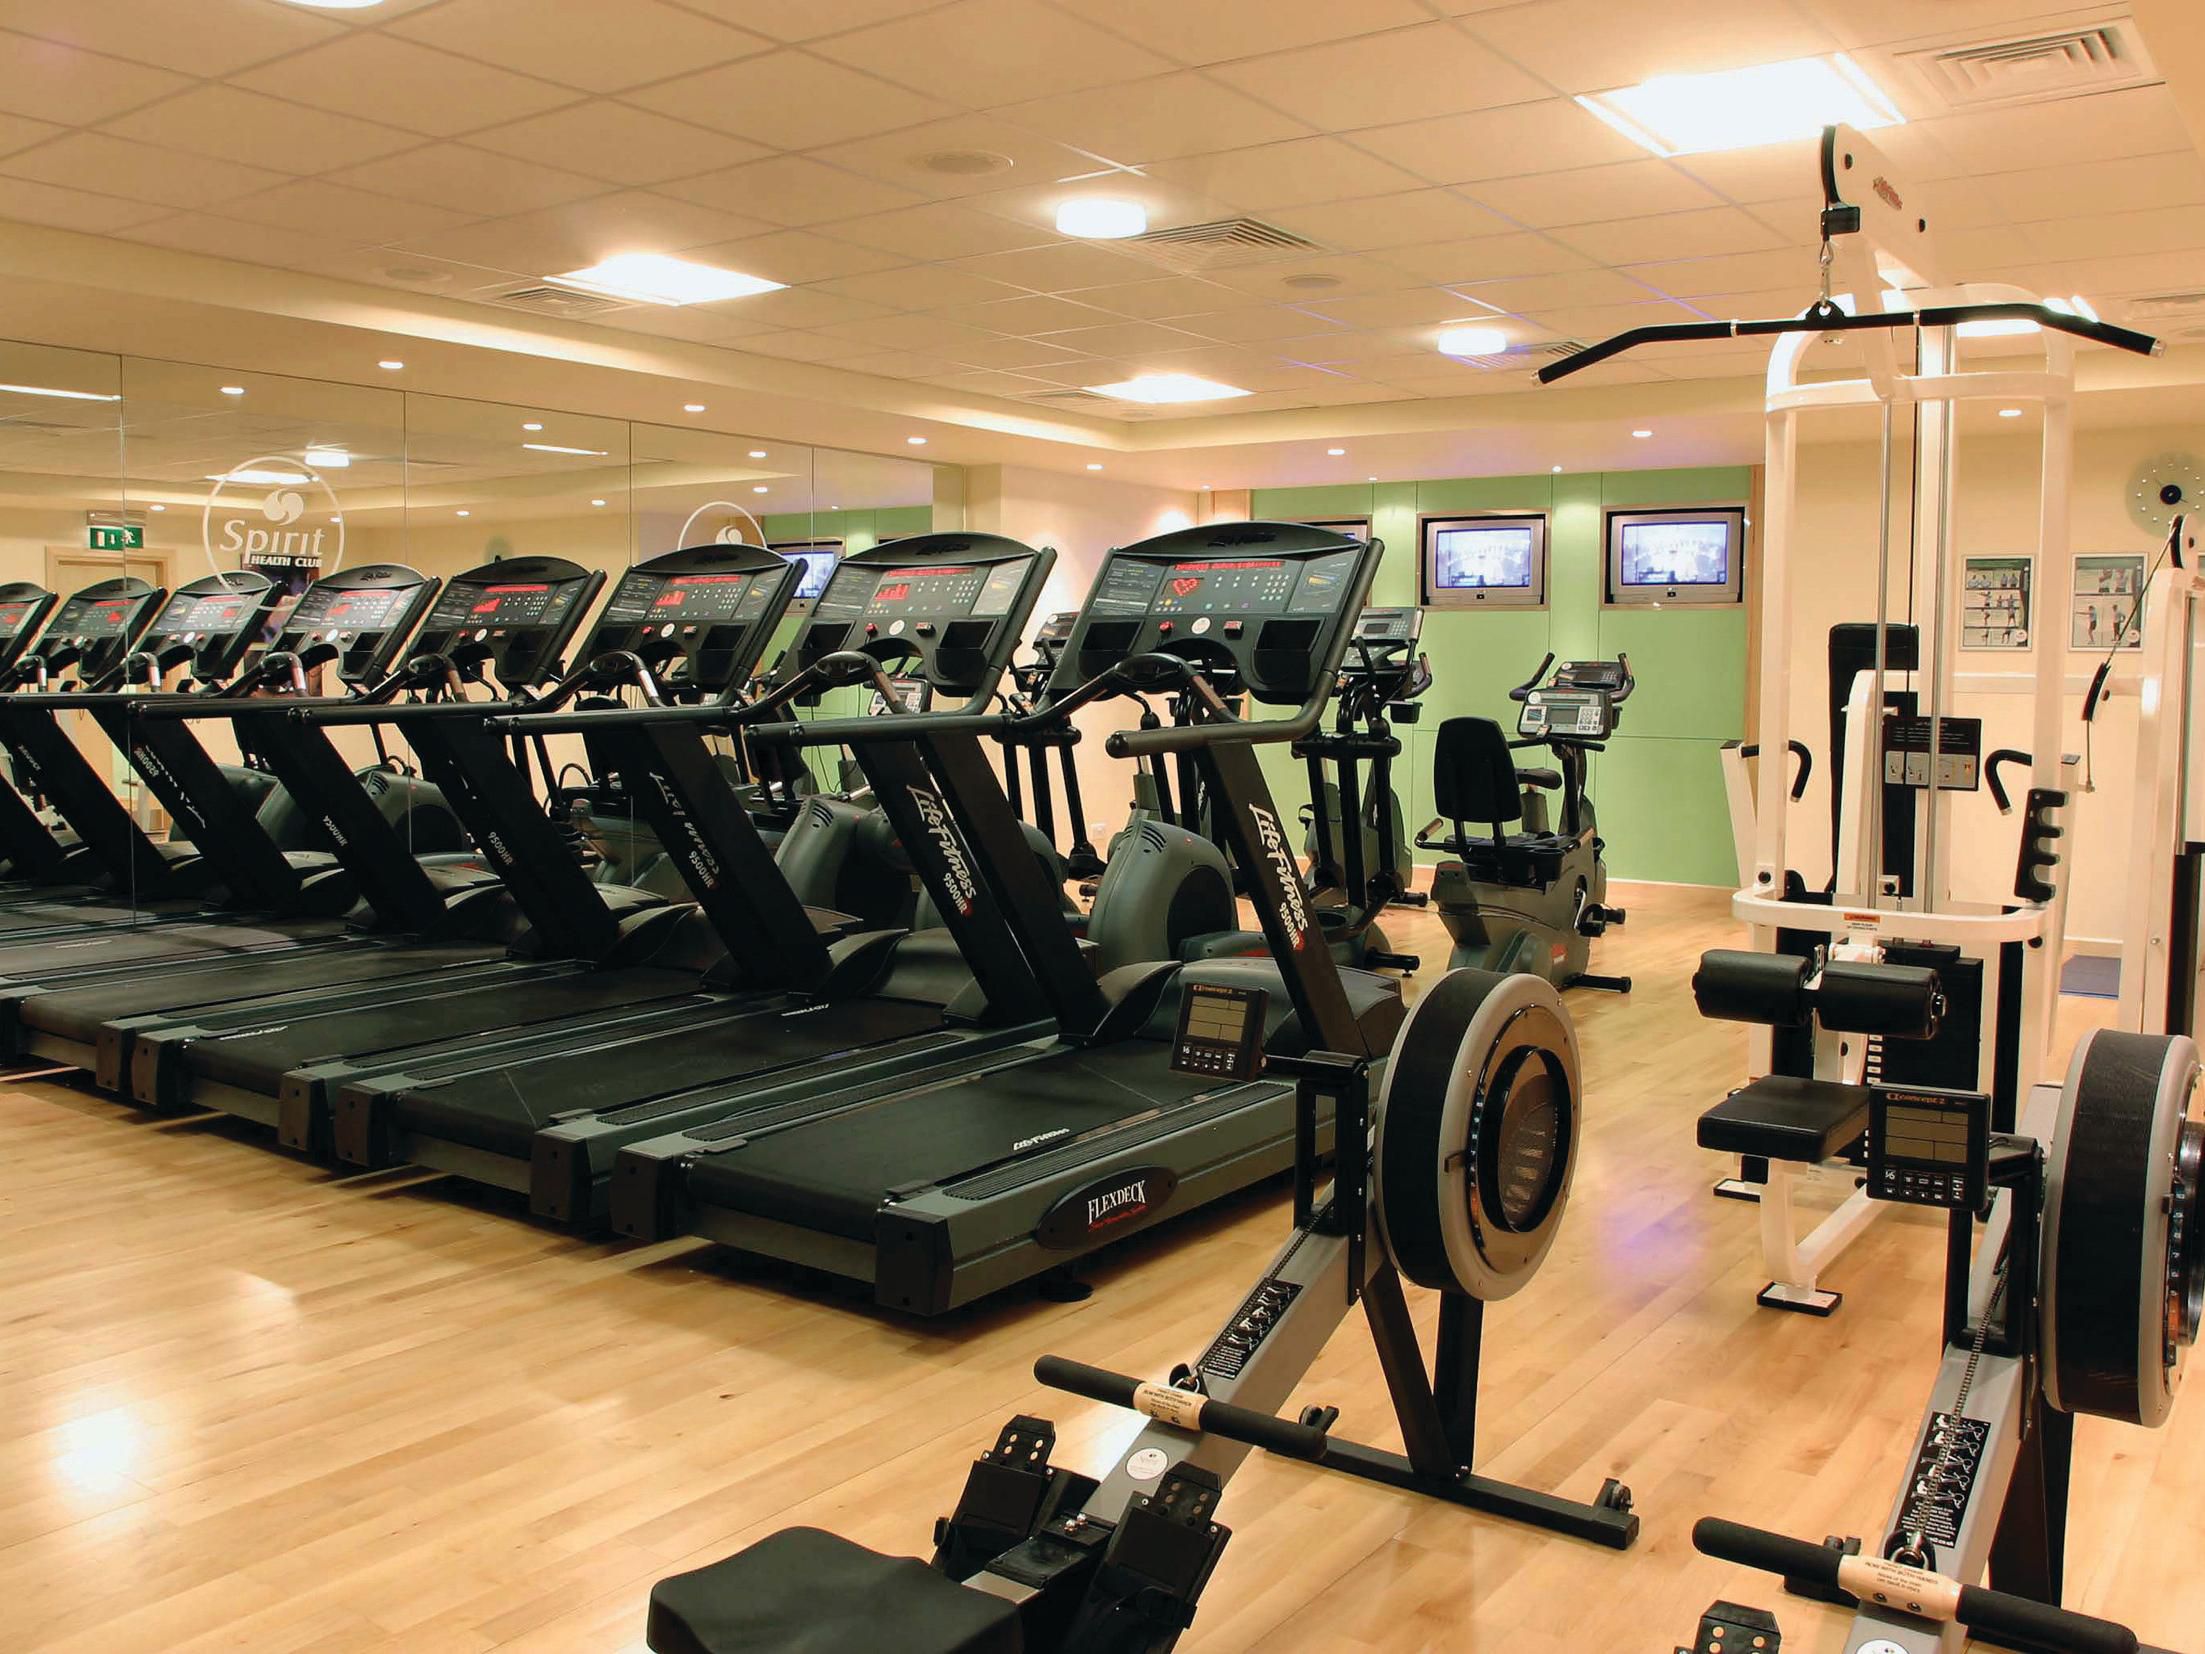 Maintaining a health and wellness routine while travelling is important, so whether you’re looking to stay on top of your fitness, or relax and unwind after a long day, Spirit Health Club has all that you need. Our fully equipped gym and heated indoor pool are open to hotel guests and members.